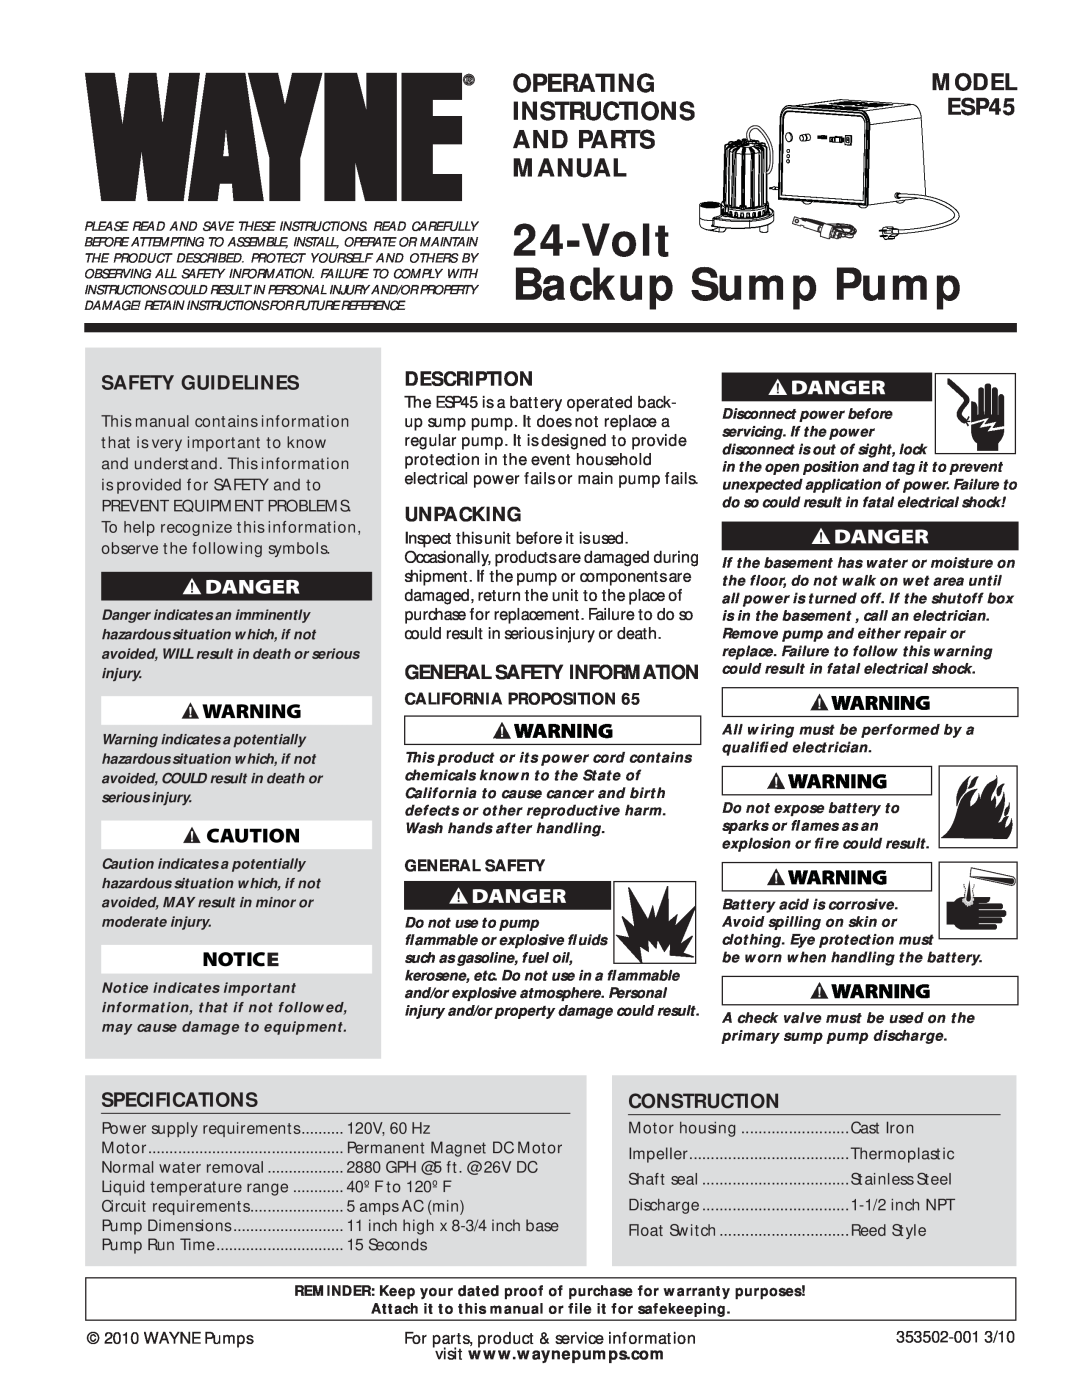 Wayne ESP45 specifications Volt Backup Sump Pump, Operating, Instructions, And Parts, Manual, Safety Guidelines, Unpacking 